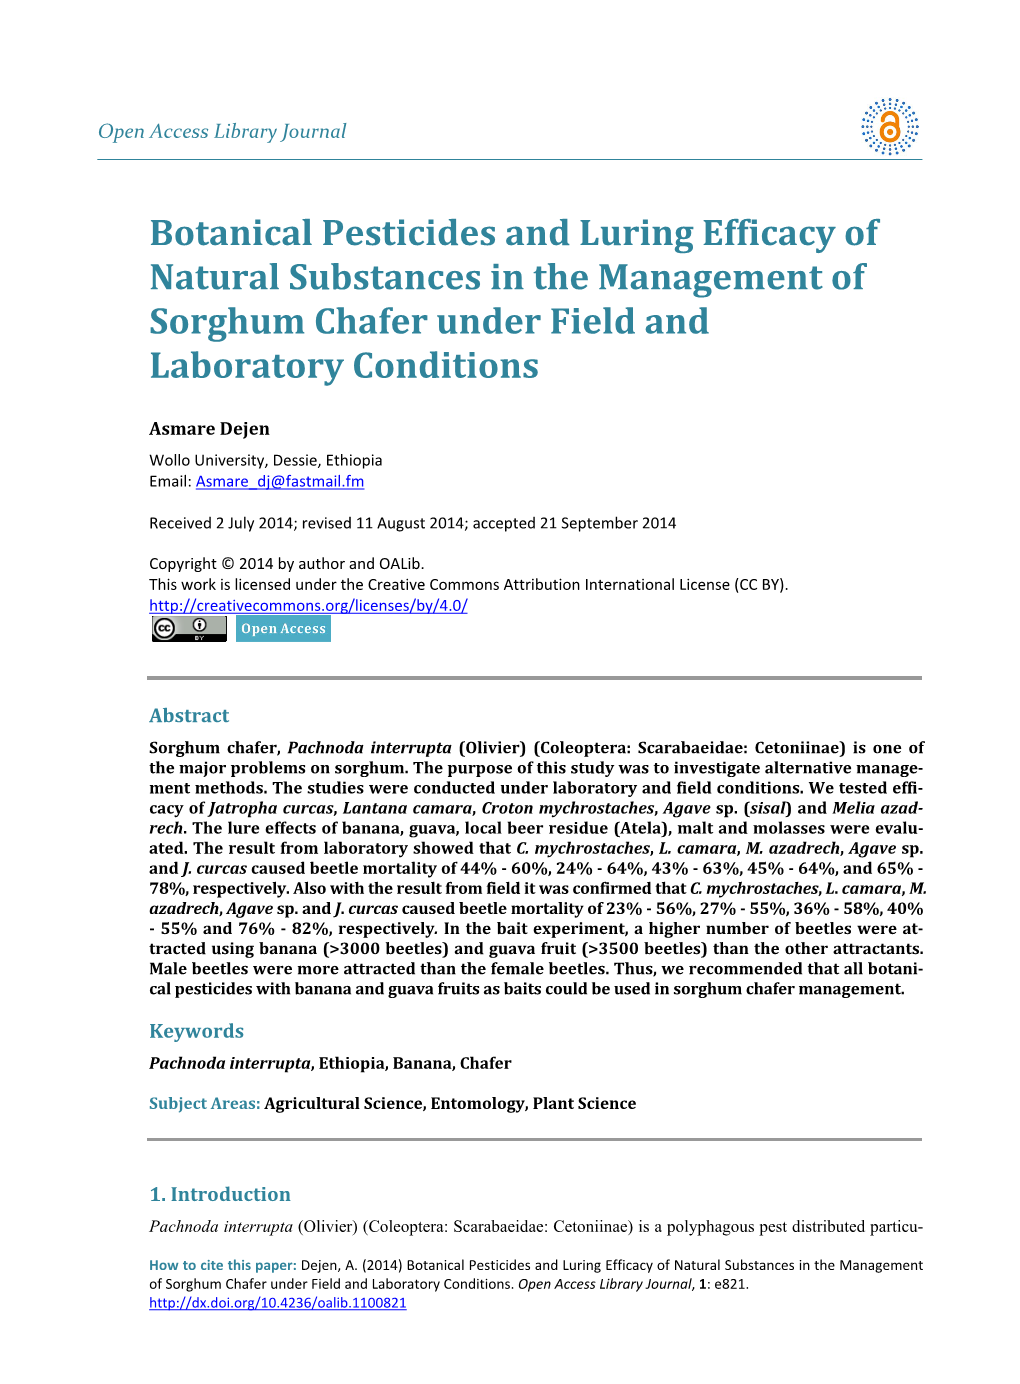 Botanical Pesticides and Luring Efficacy of Natural Substances in the Management of Sorghum Chafer Under Field and Laboratory Conditions